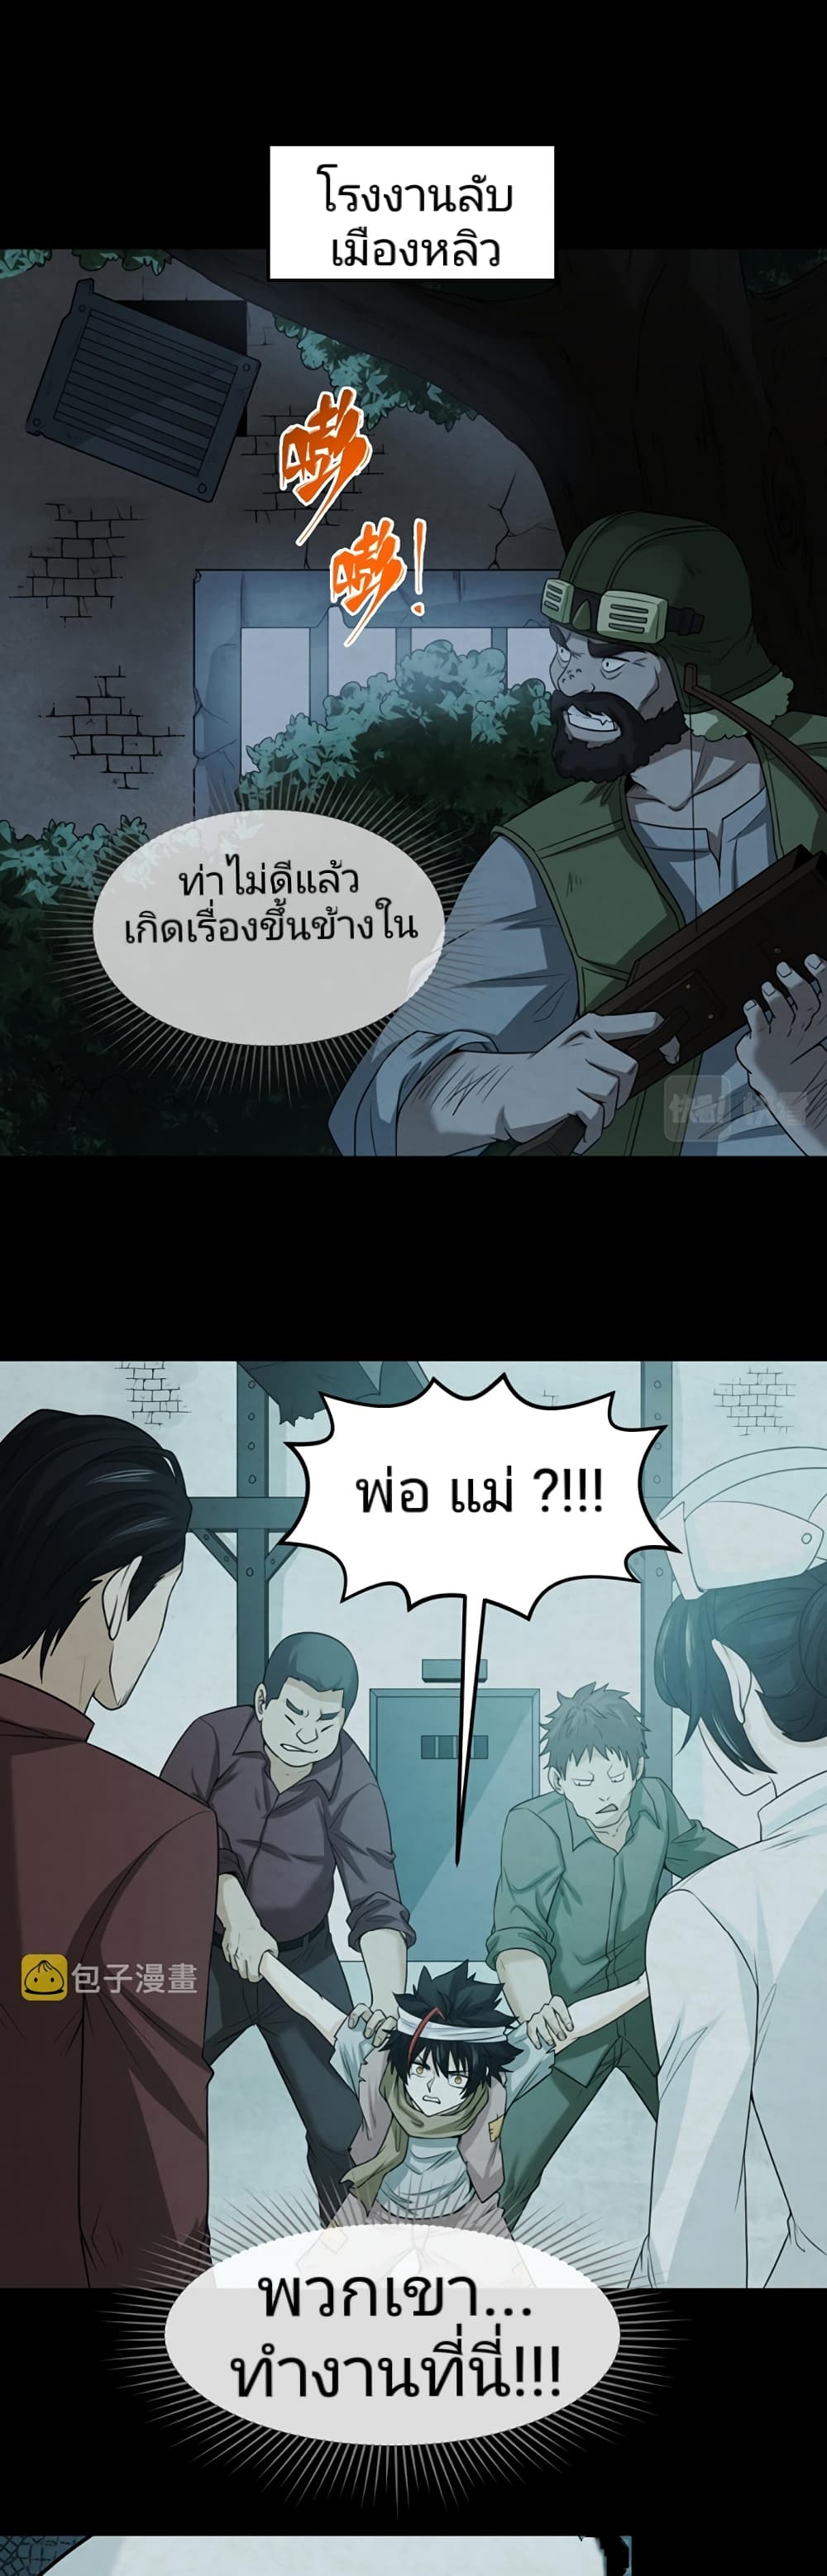 The Age of Ghost Spirits à¸à¸­à¸à¸à¸µà¹ 33 (2)